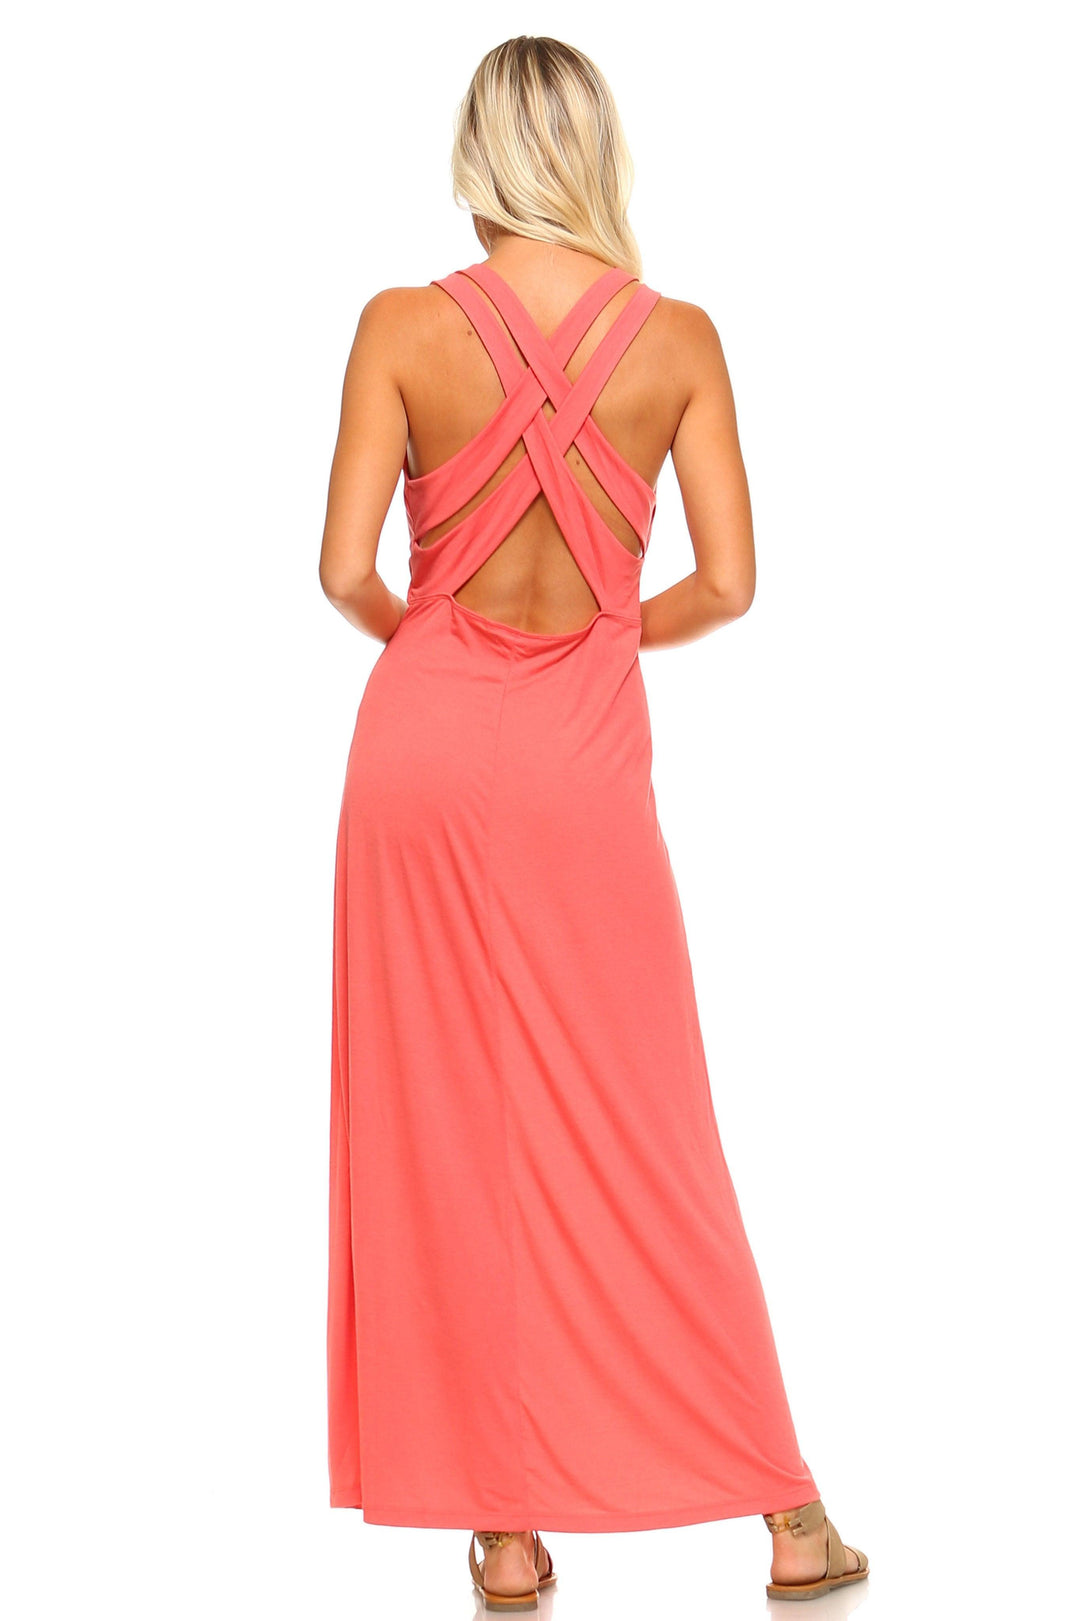 Women's Halter Maxi Dress with Cross Back Straps - Brand My Case